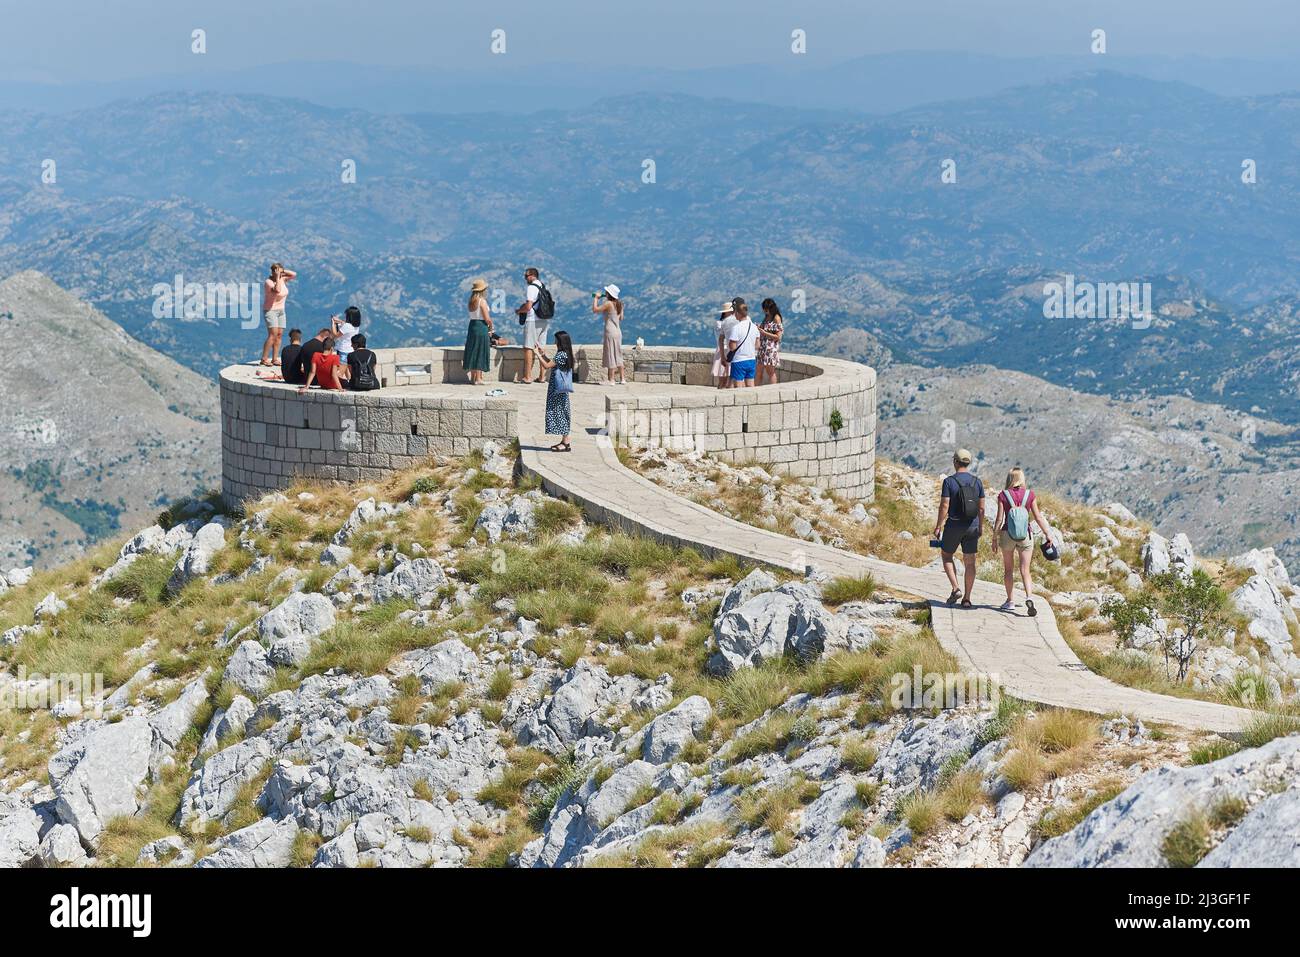 CETINJE, MONTENEGRO - JULY 23, 2021: Tourists came to the viewpoint of Lovcen National Park Stock Photo